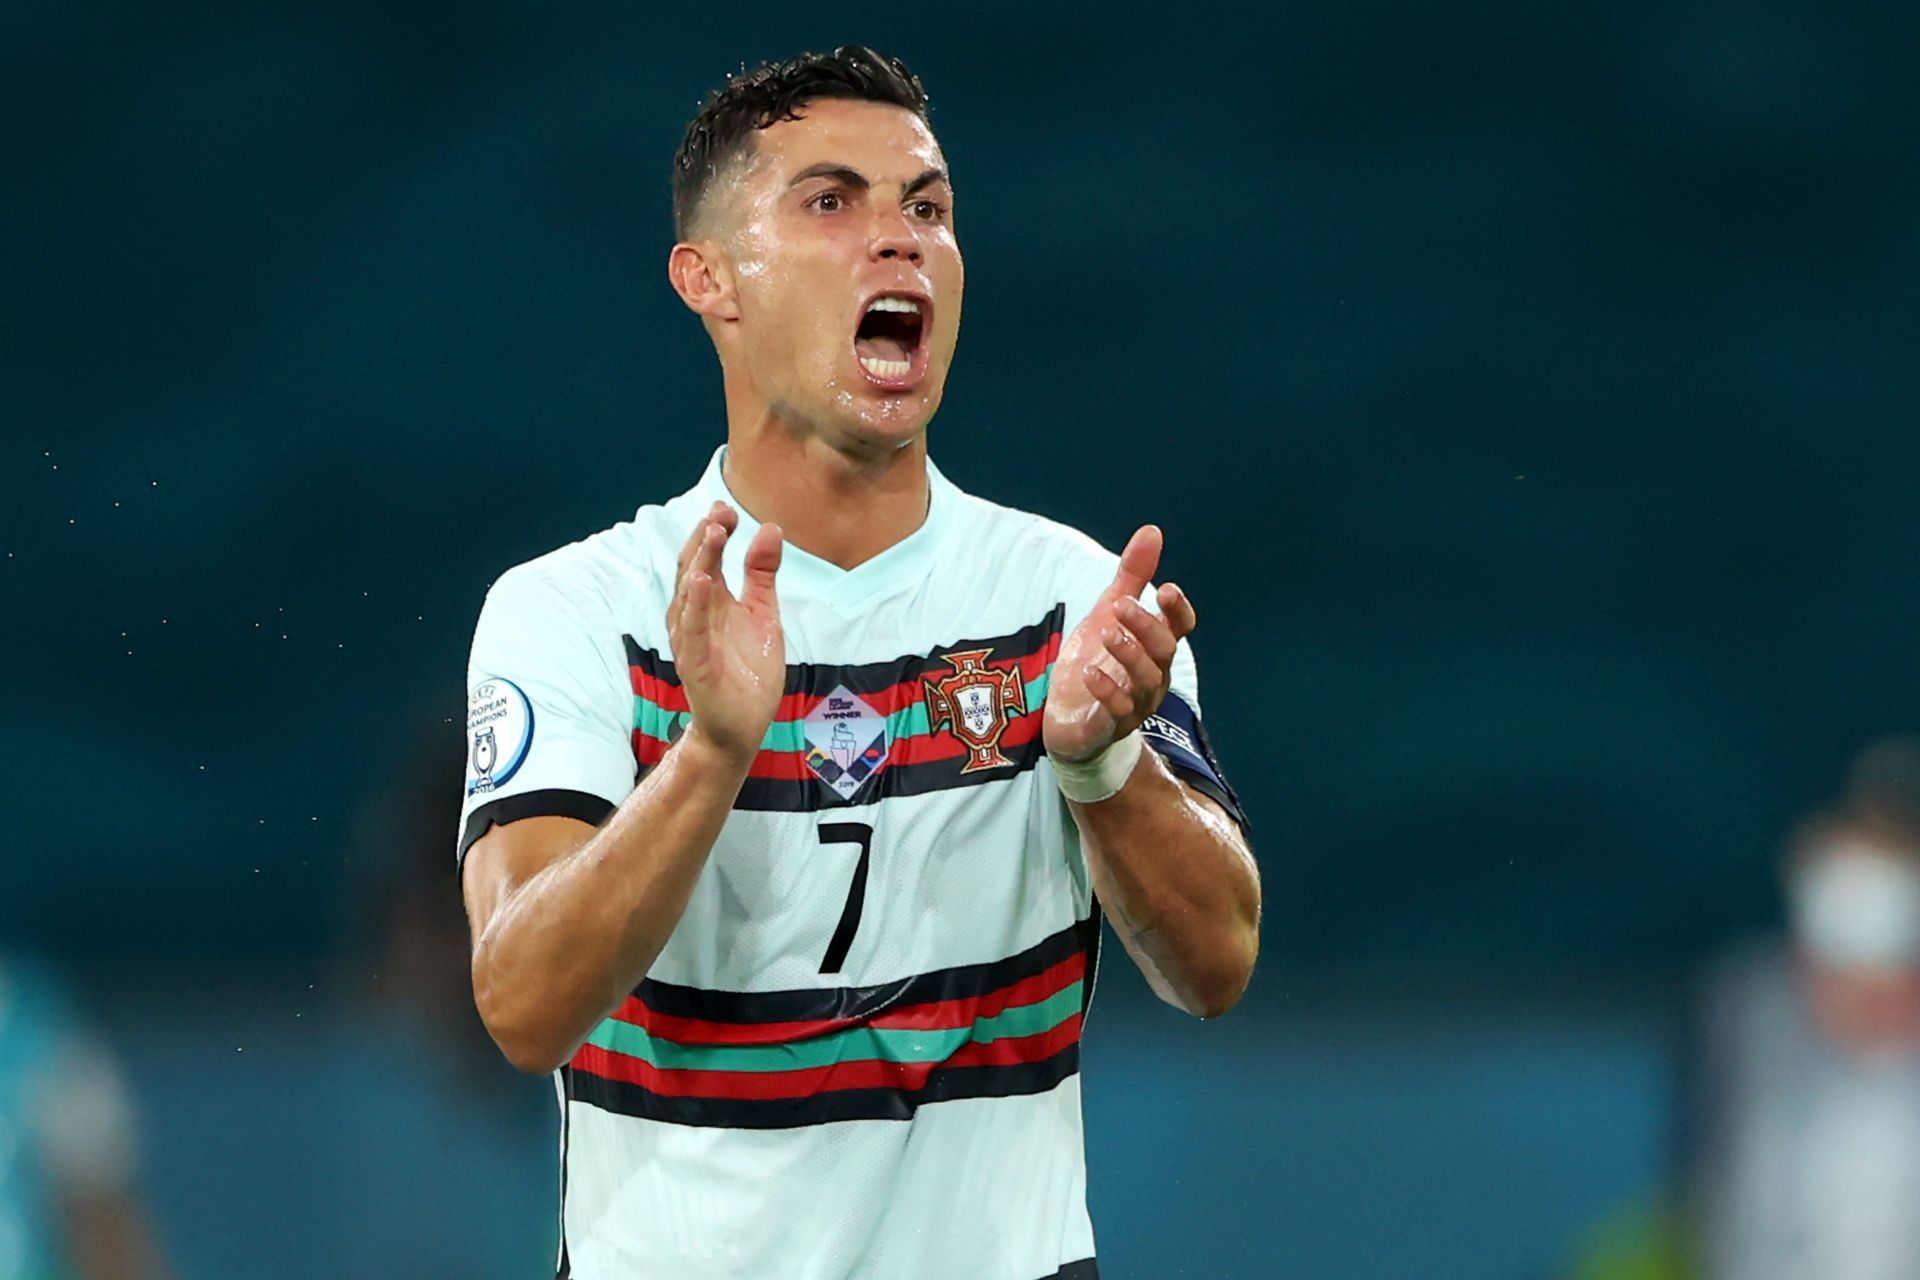 Cristiano Ronaldo will be hoping that Portugal qualifies for the World Cup this year